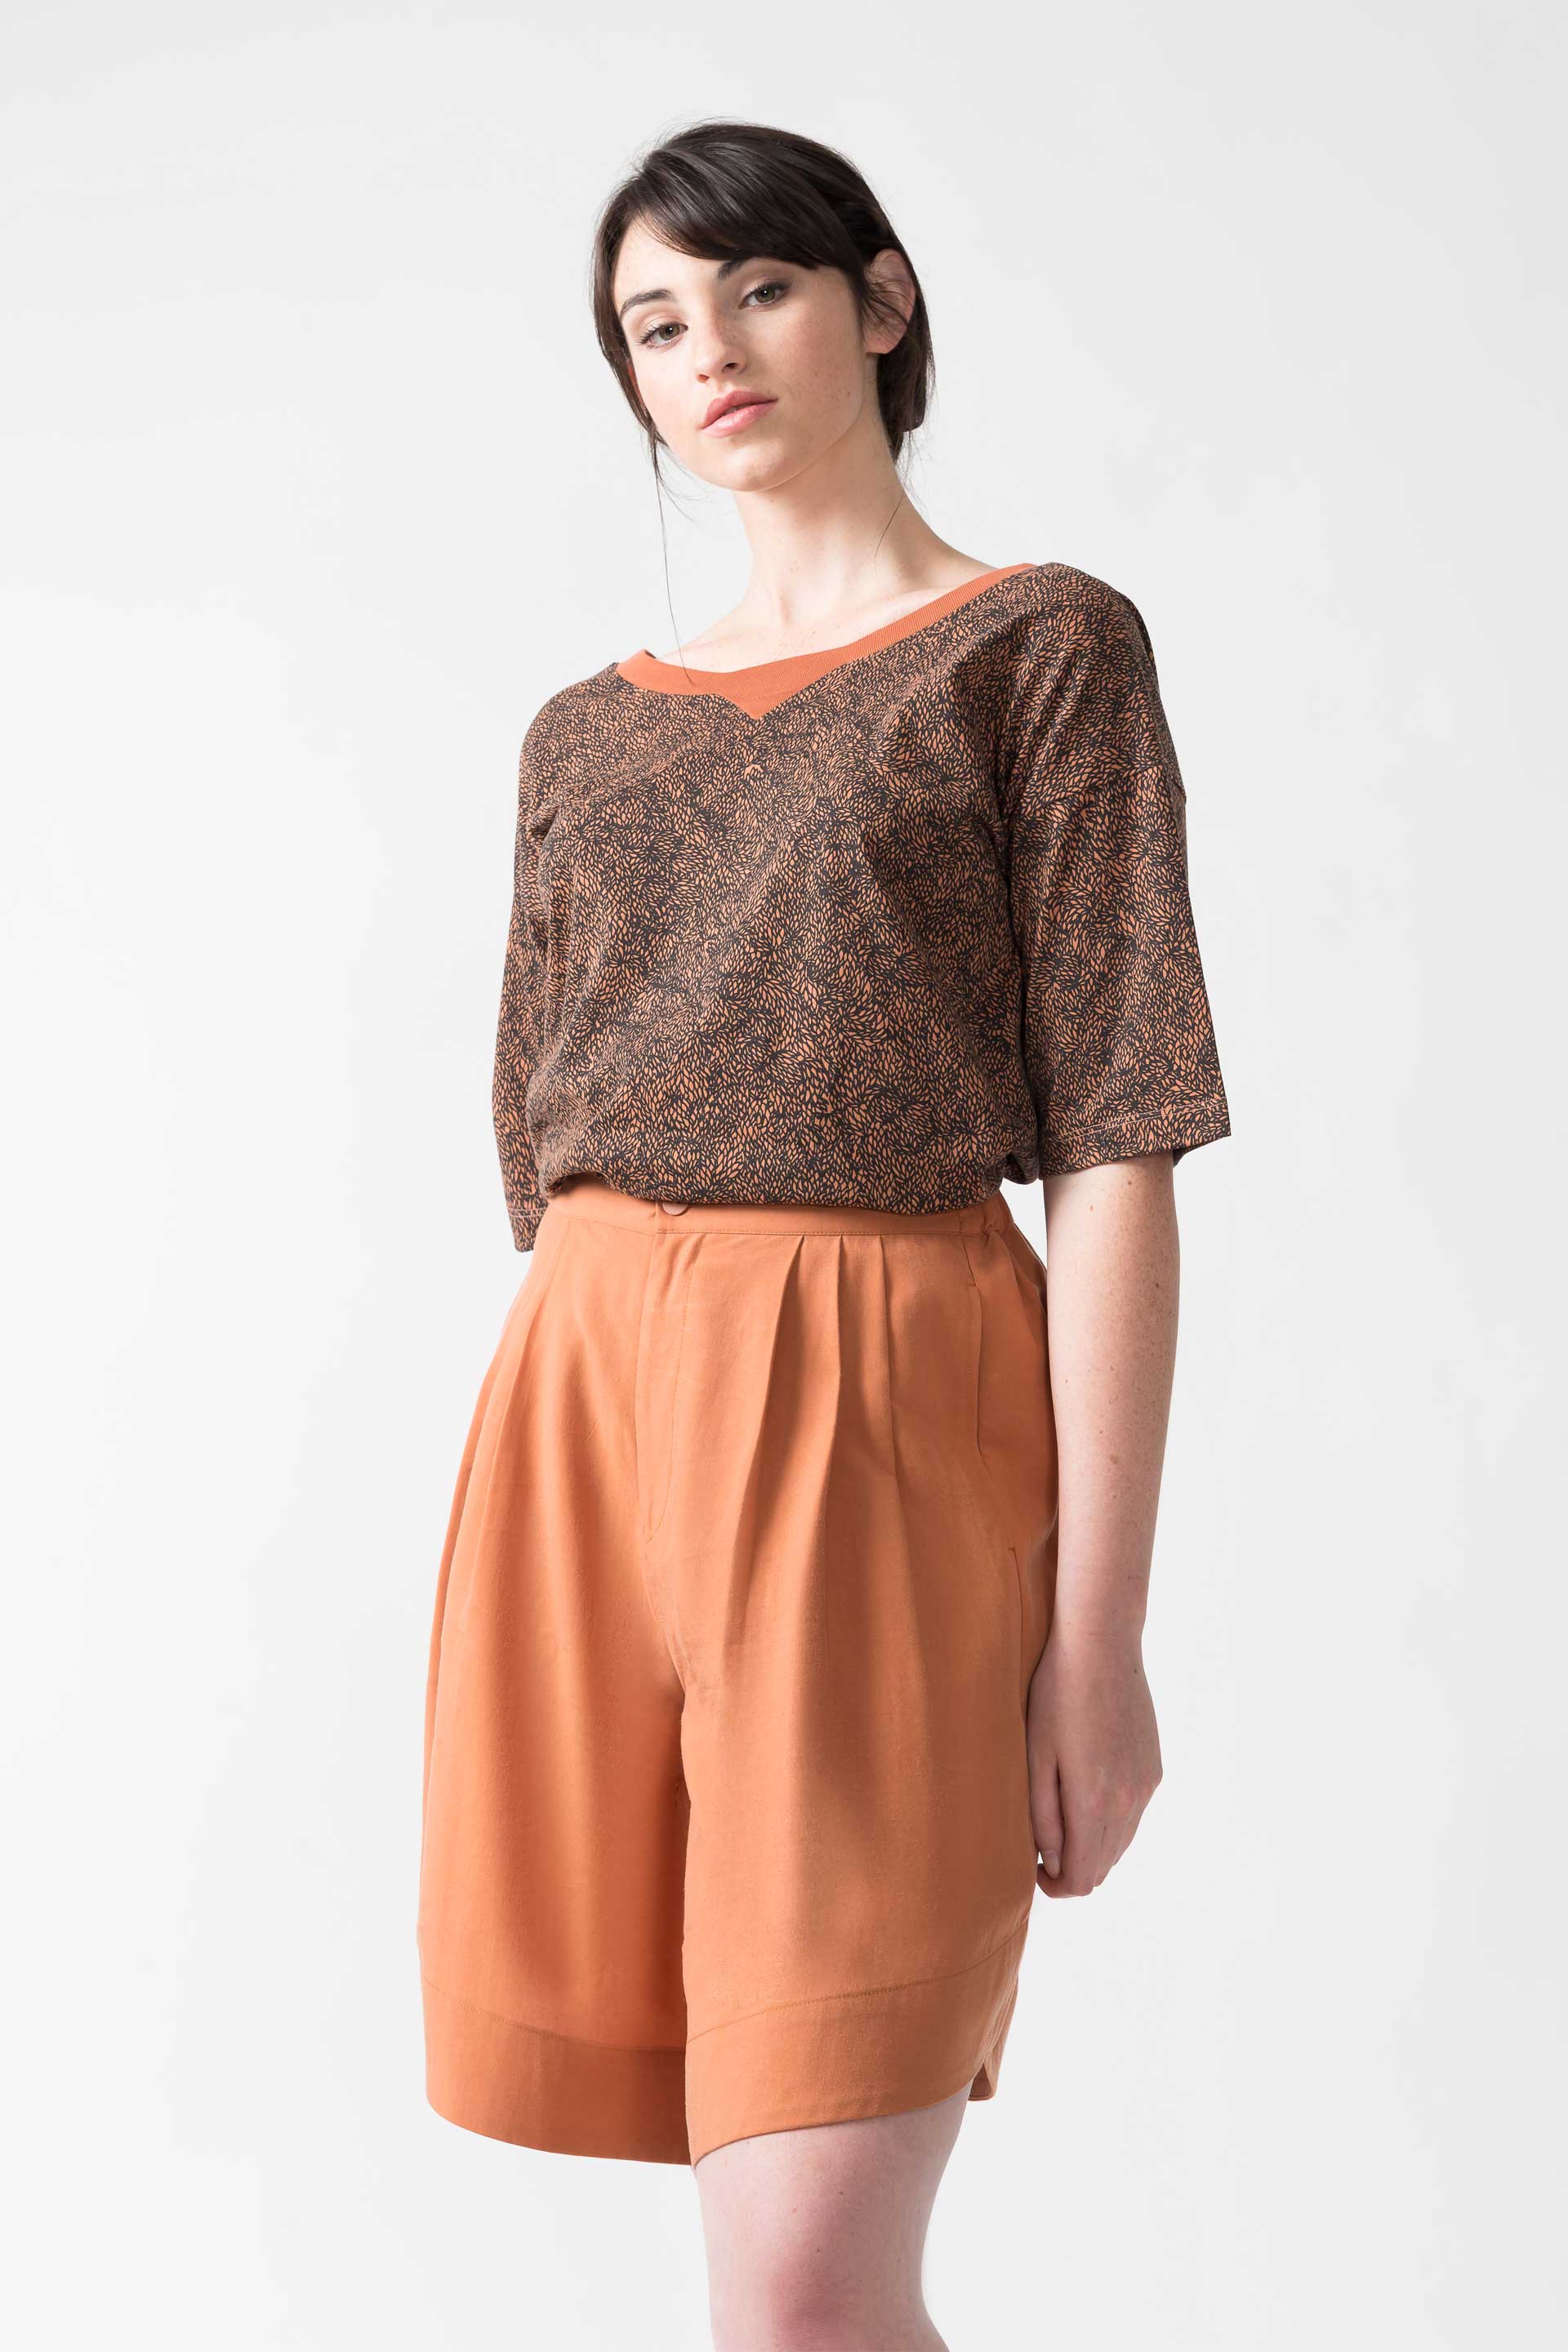 Terracotta Printed Recycled T-Shirt by SKFK